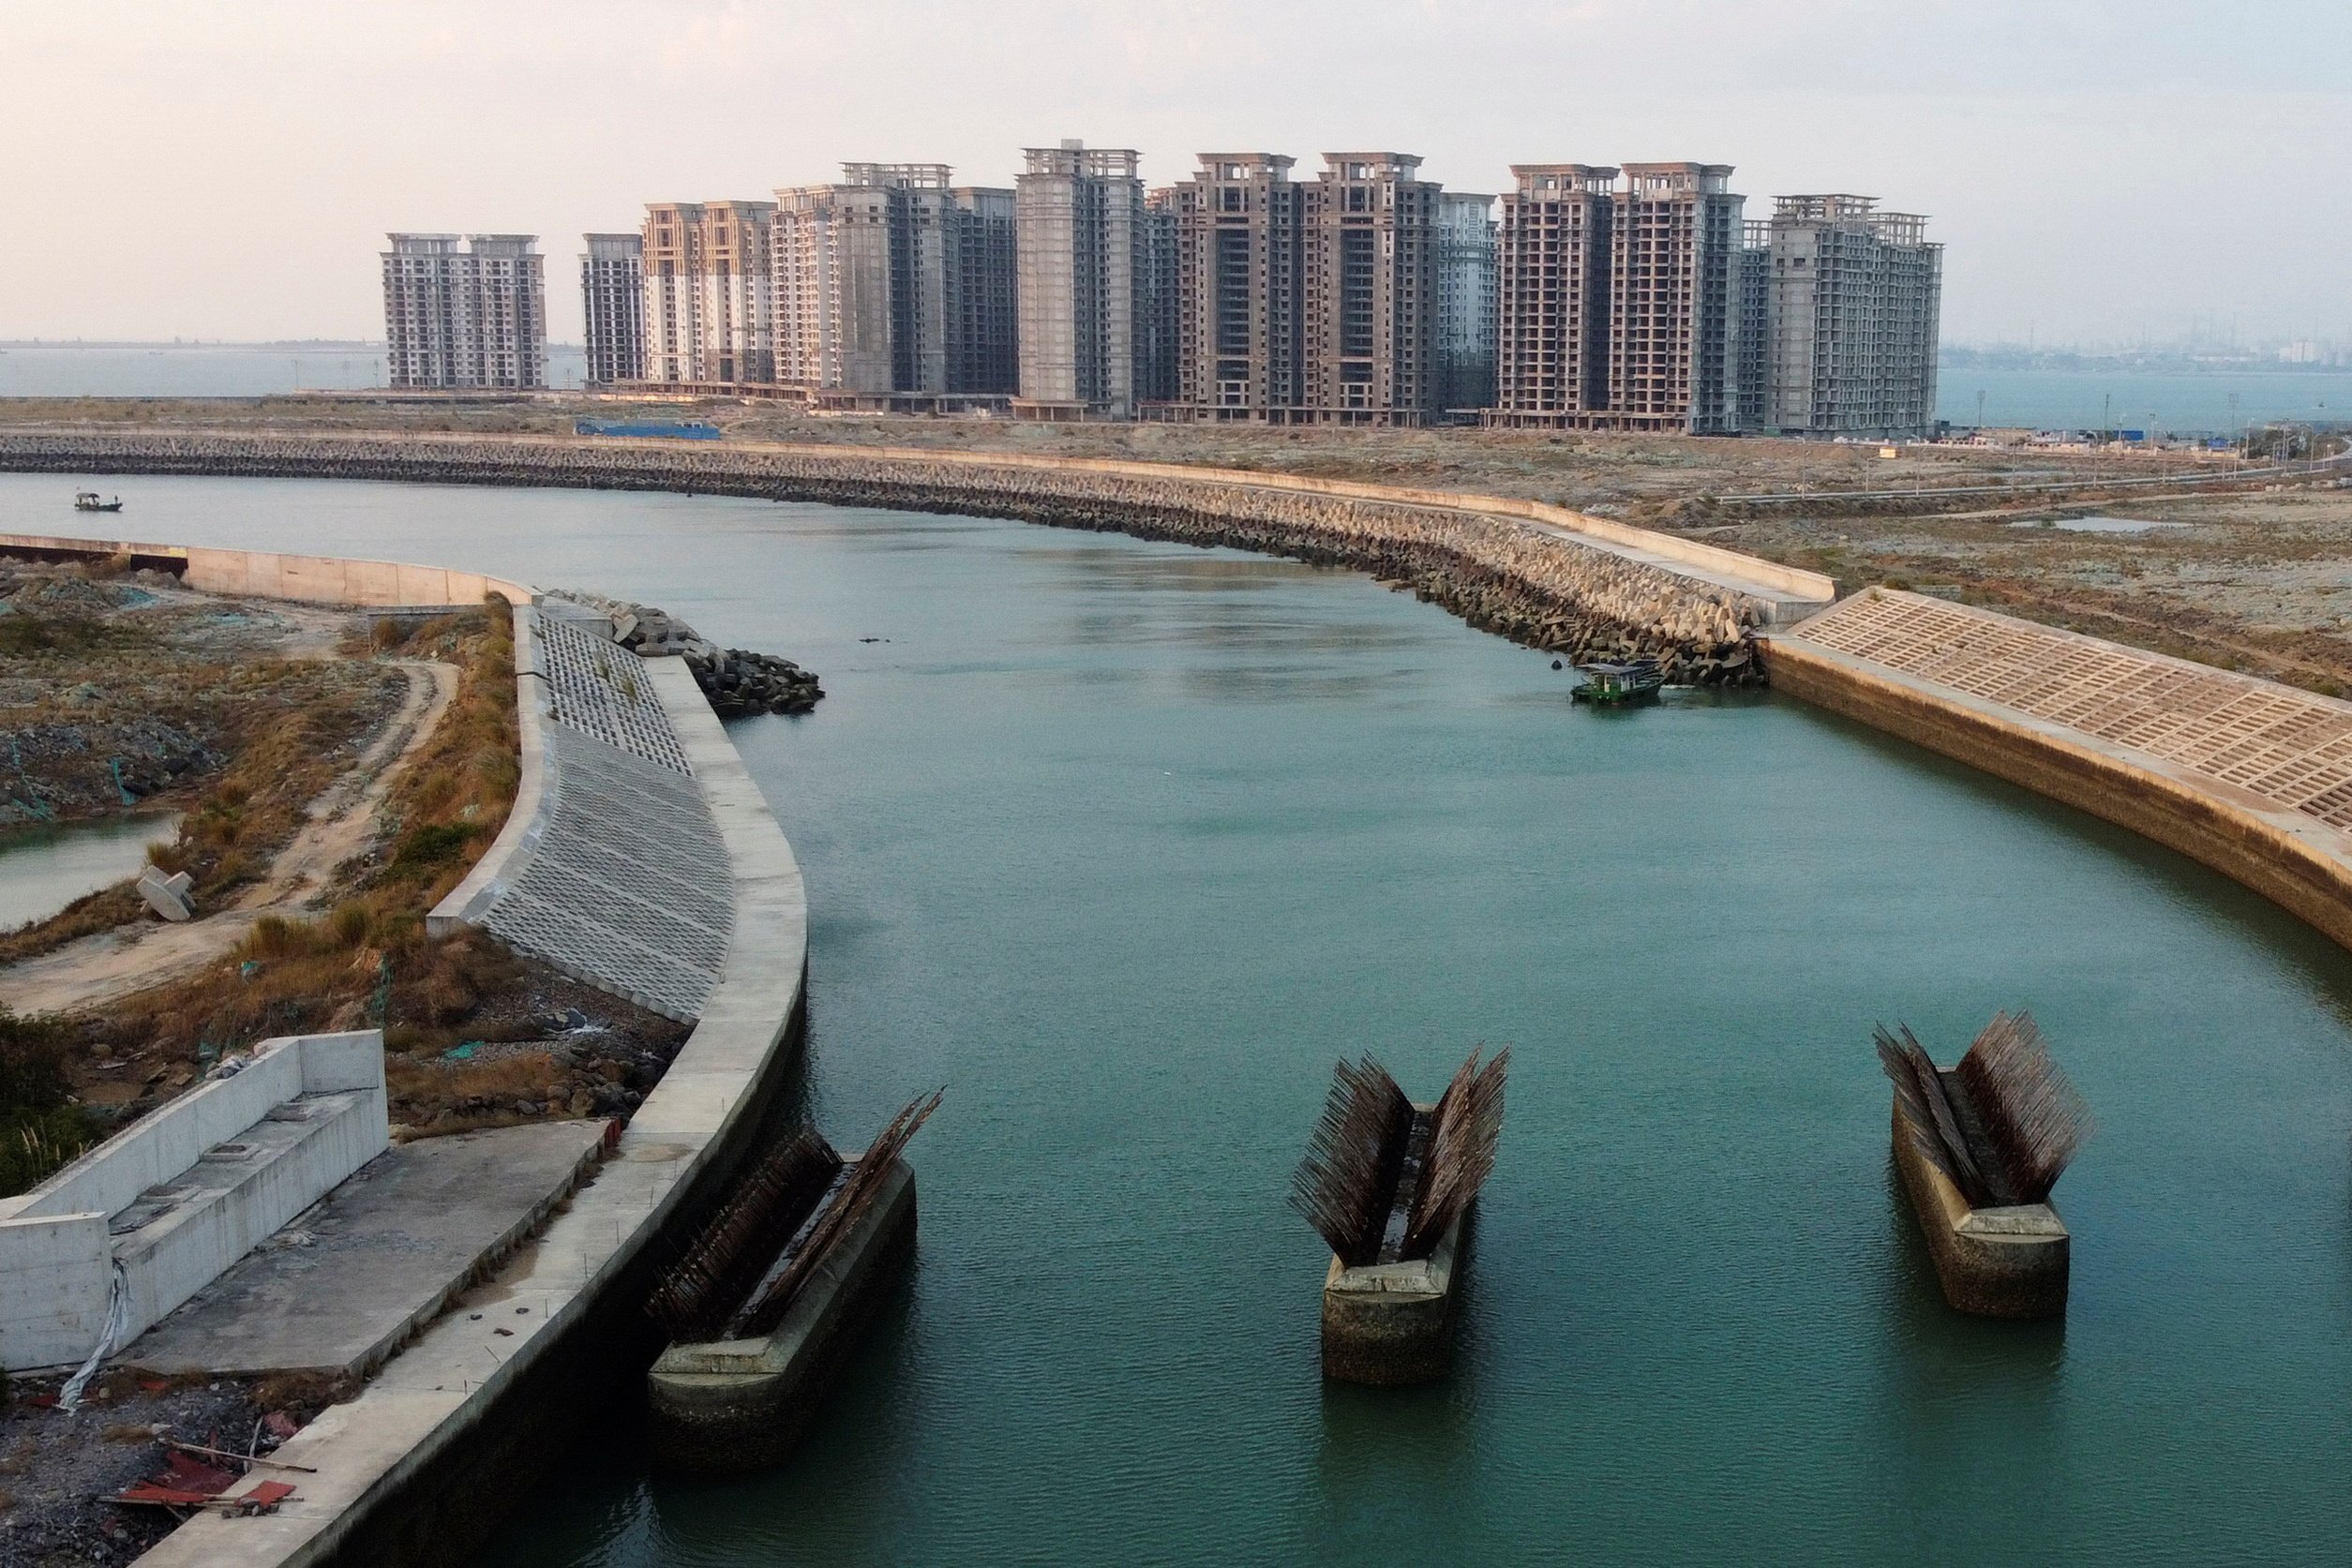 A view of unfinished buildings on the man-made Ocean Flower Island in Hainan province on January 6. Authorities have ordered the 39 buildings to be demolished, accusing developers China Evergrande Group of breaching regulations, in yet another blow to the indebted firm. Photo: Reuters